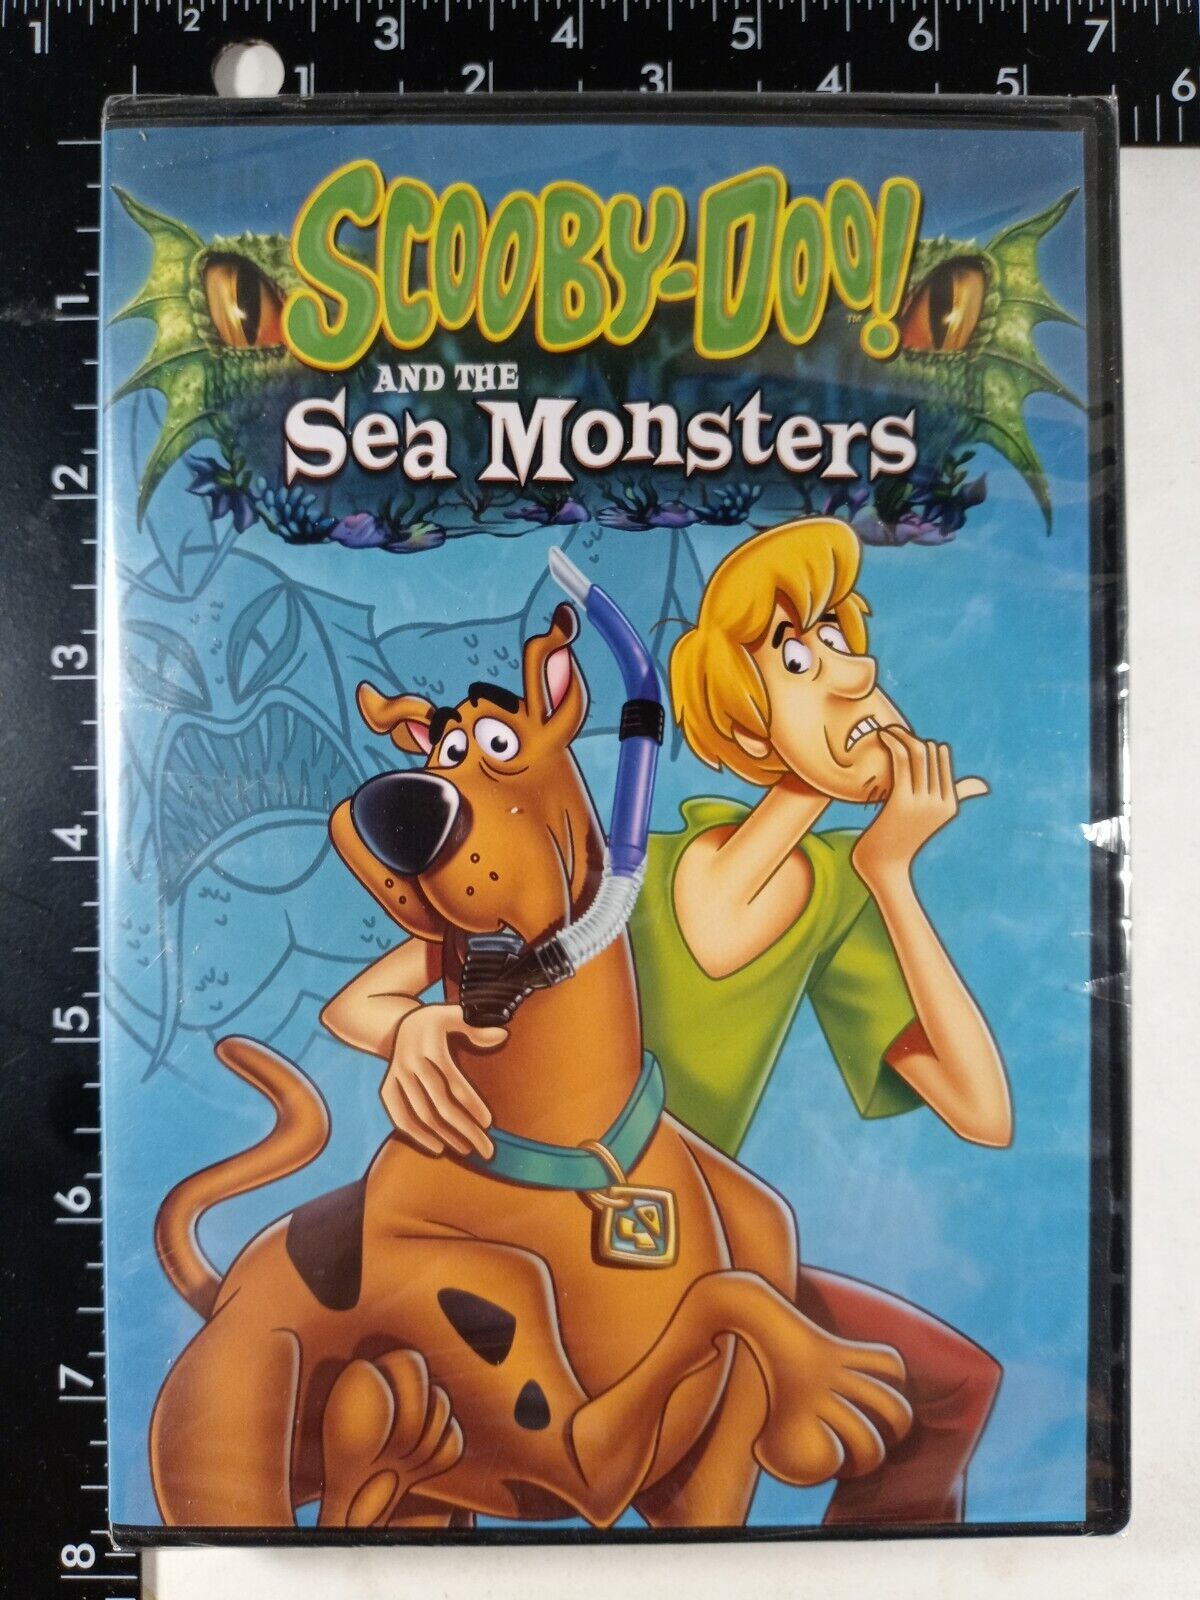 Scooby-Doo and the Sea Monsters (DVD, 2012 FS) Animated Cartoon Episodes  NEW 883929207213 | eBay